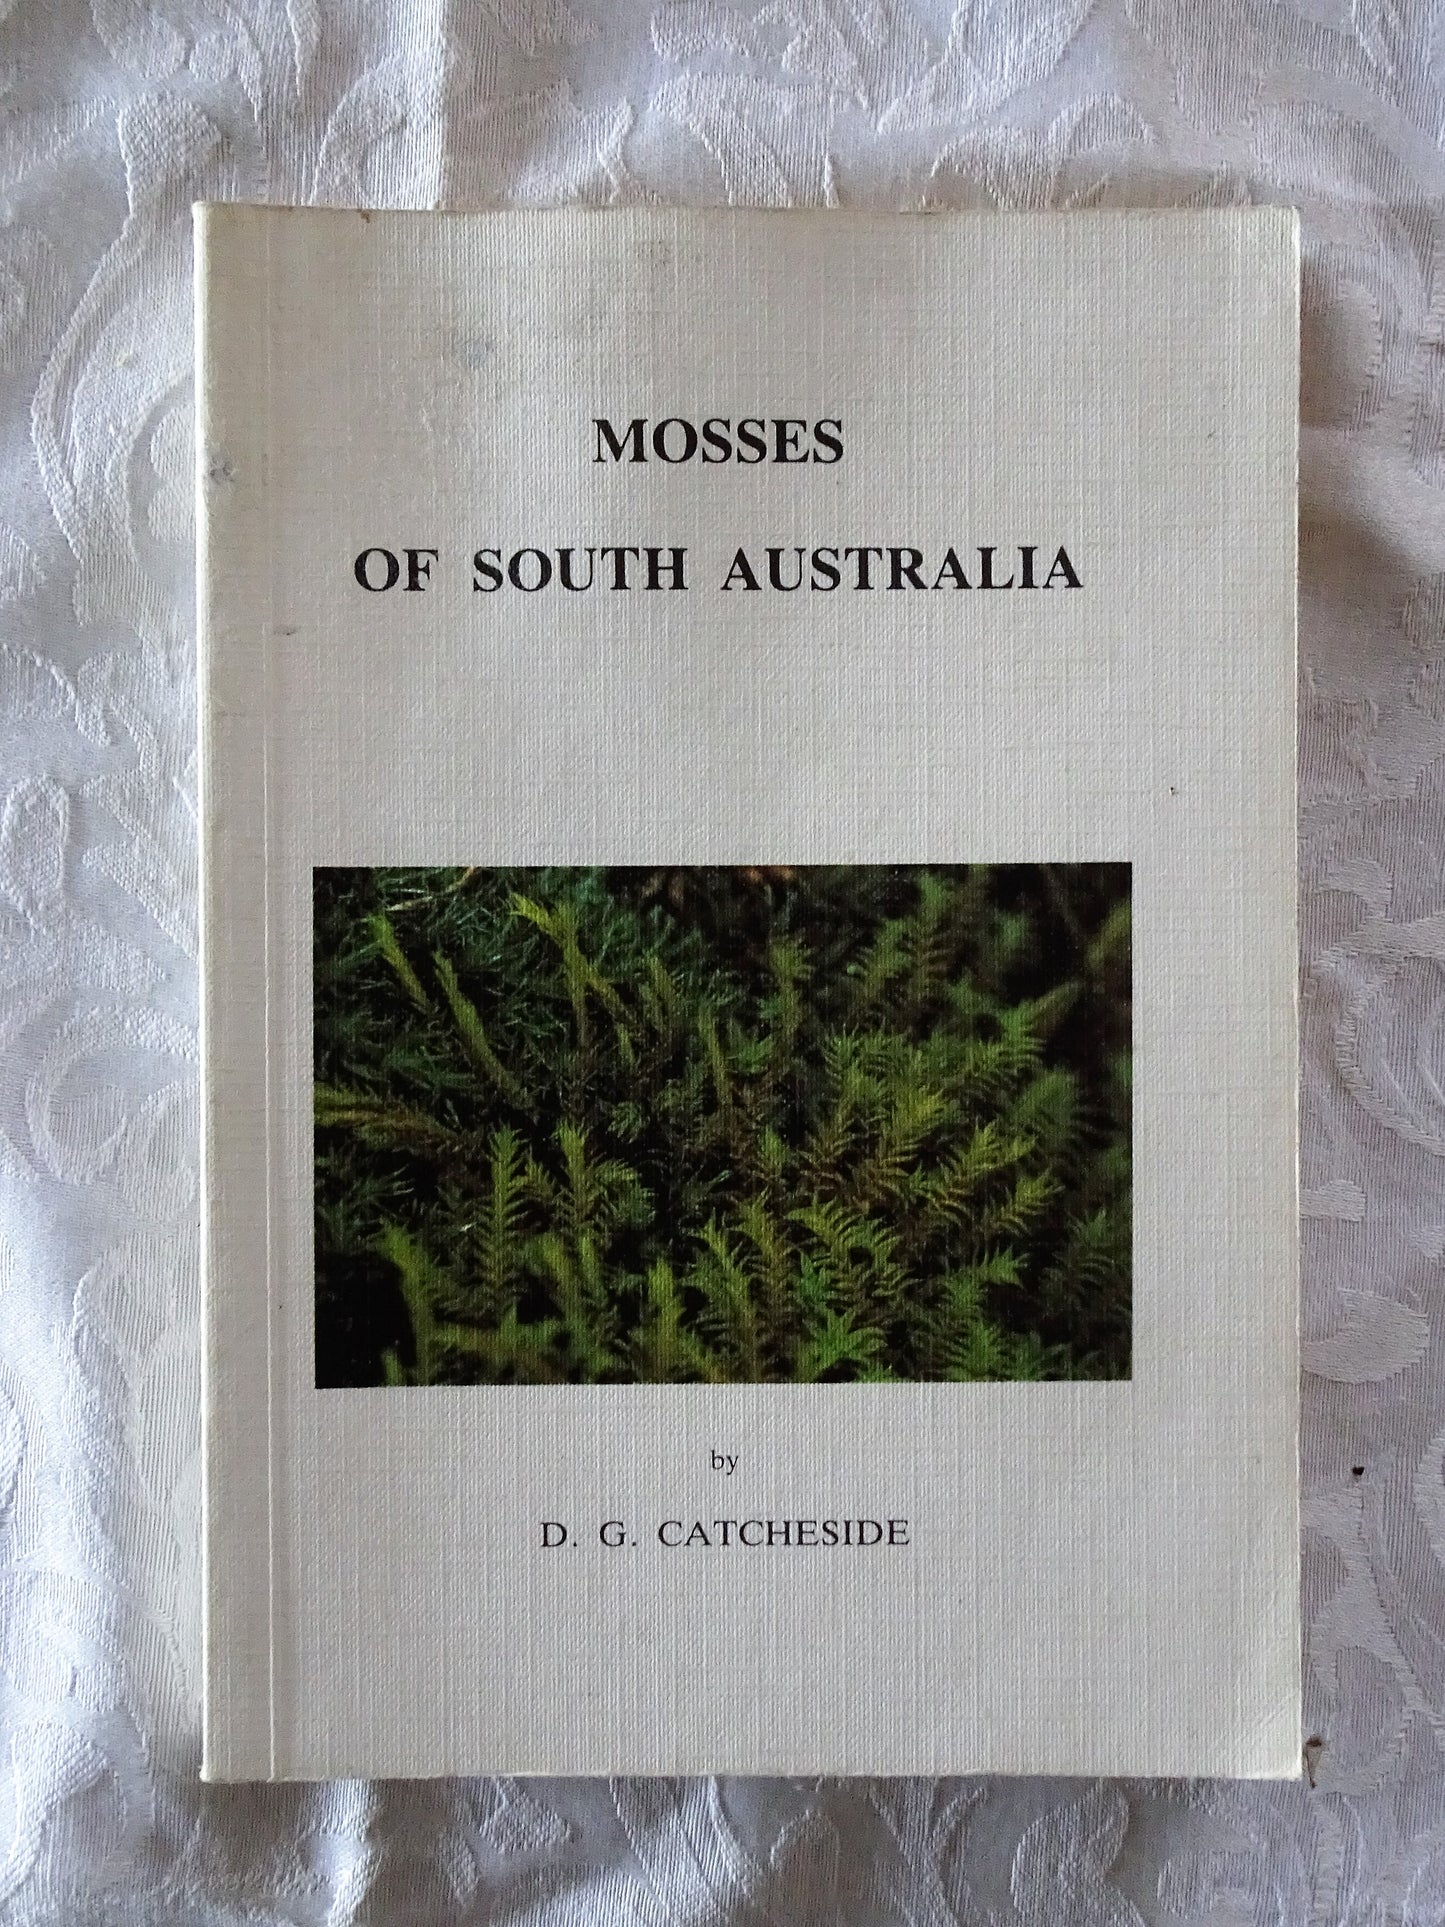 Mosses of South Australia by D. G. Catcheside